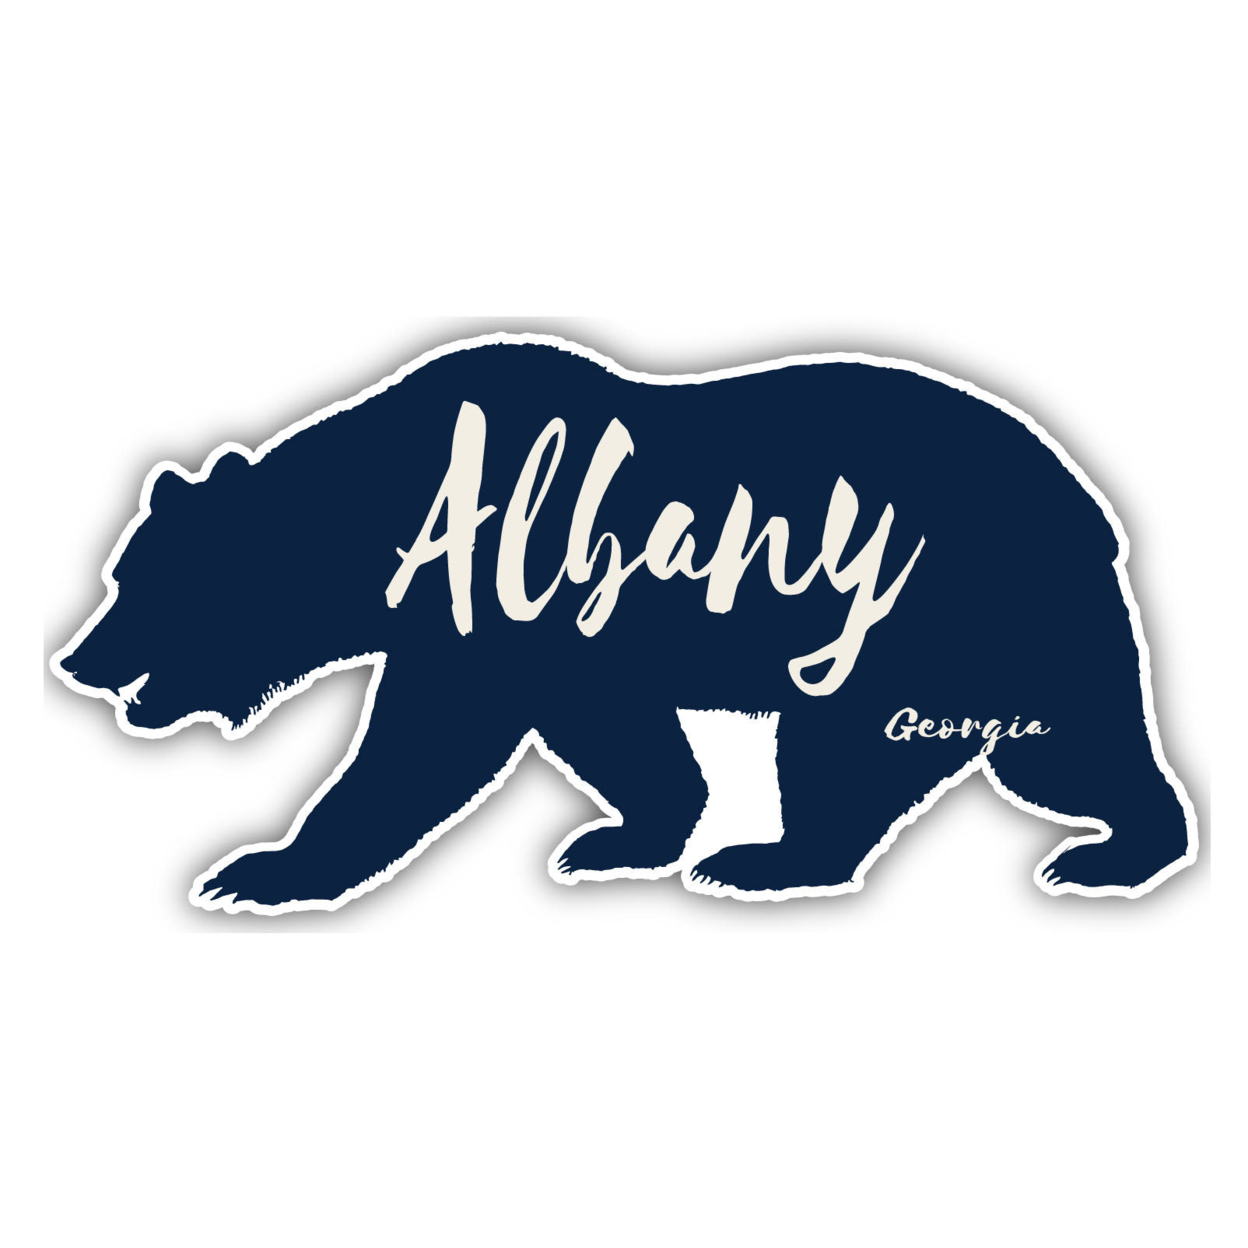 Albany Georgia Souvenir Decorative Stickers (Choose Theme And Size) - 4-Pack, 12-Inch, Tent